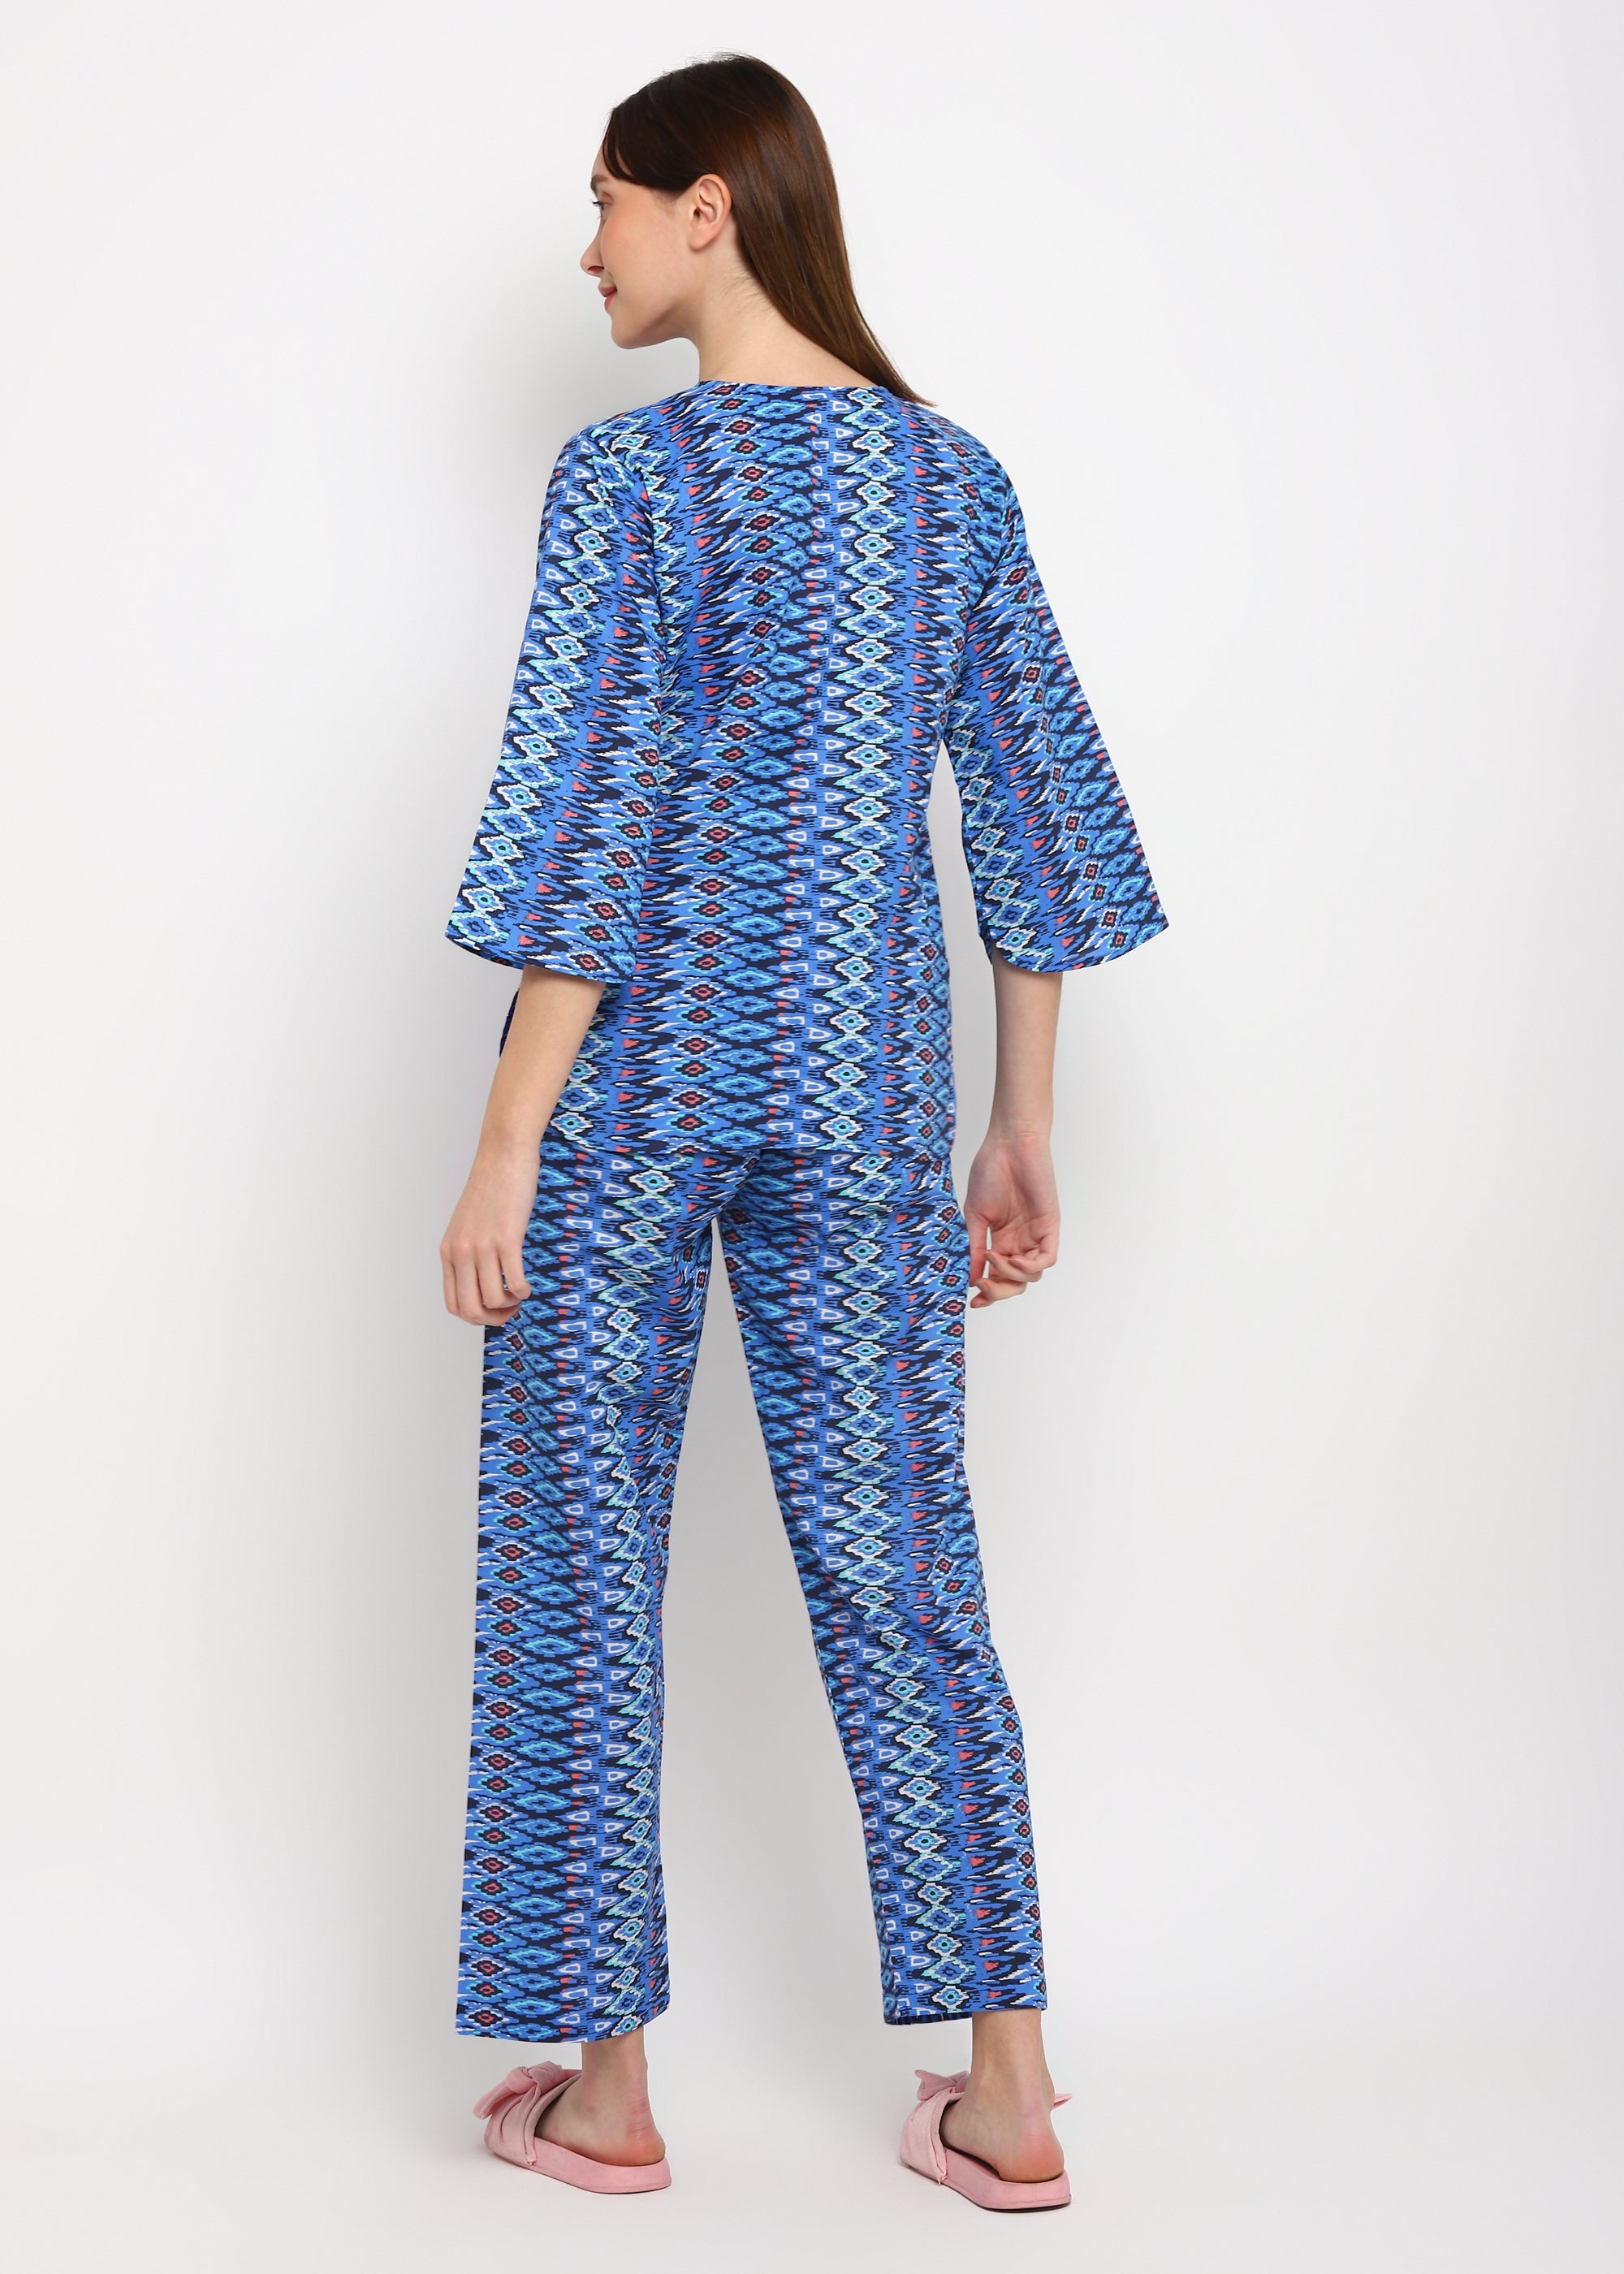 Blue Abstract Print V Neck 3/4th Sleeve Women's Night suit - Shopbloom